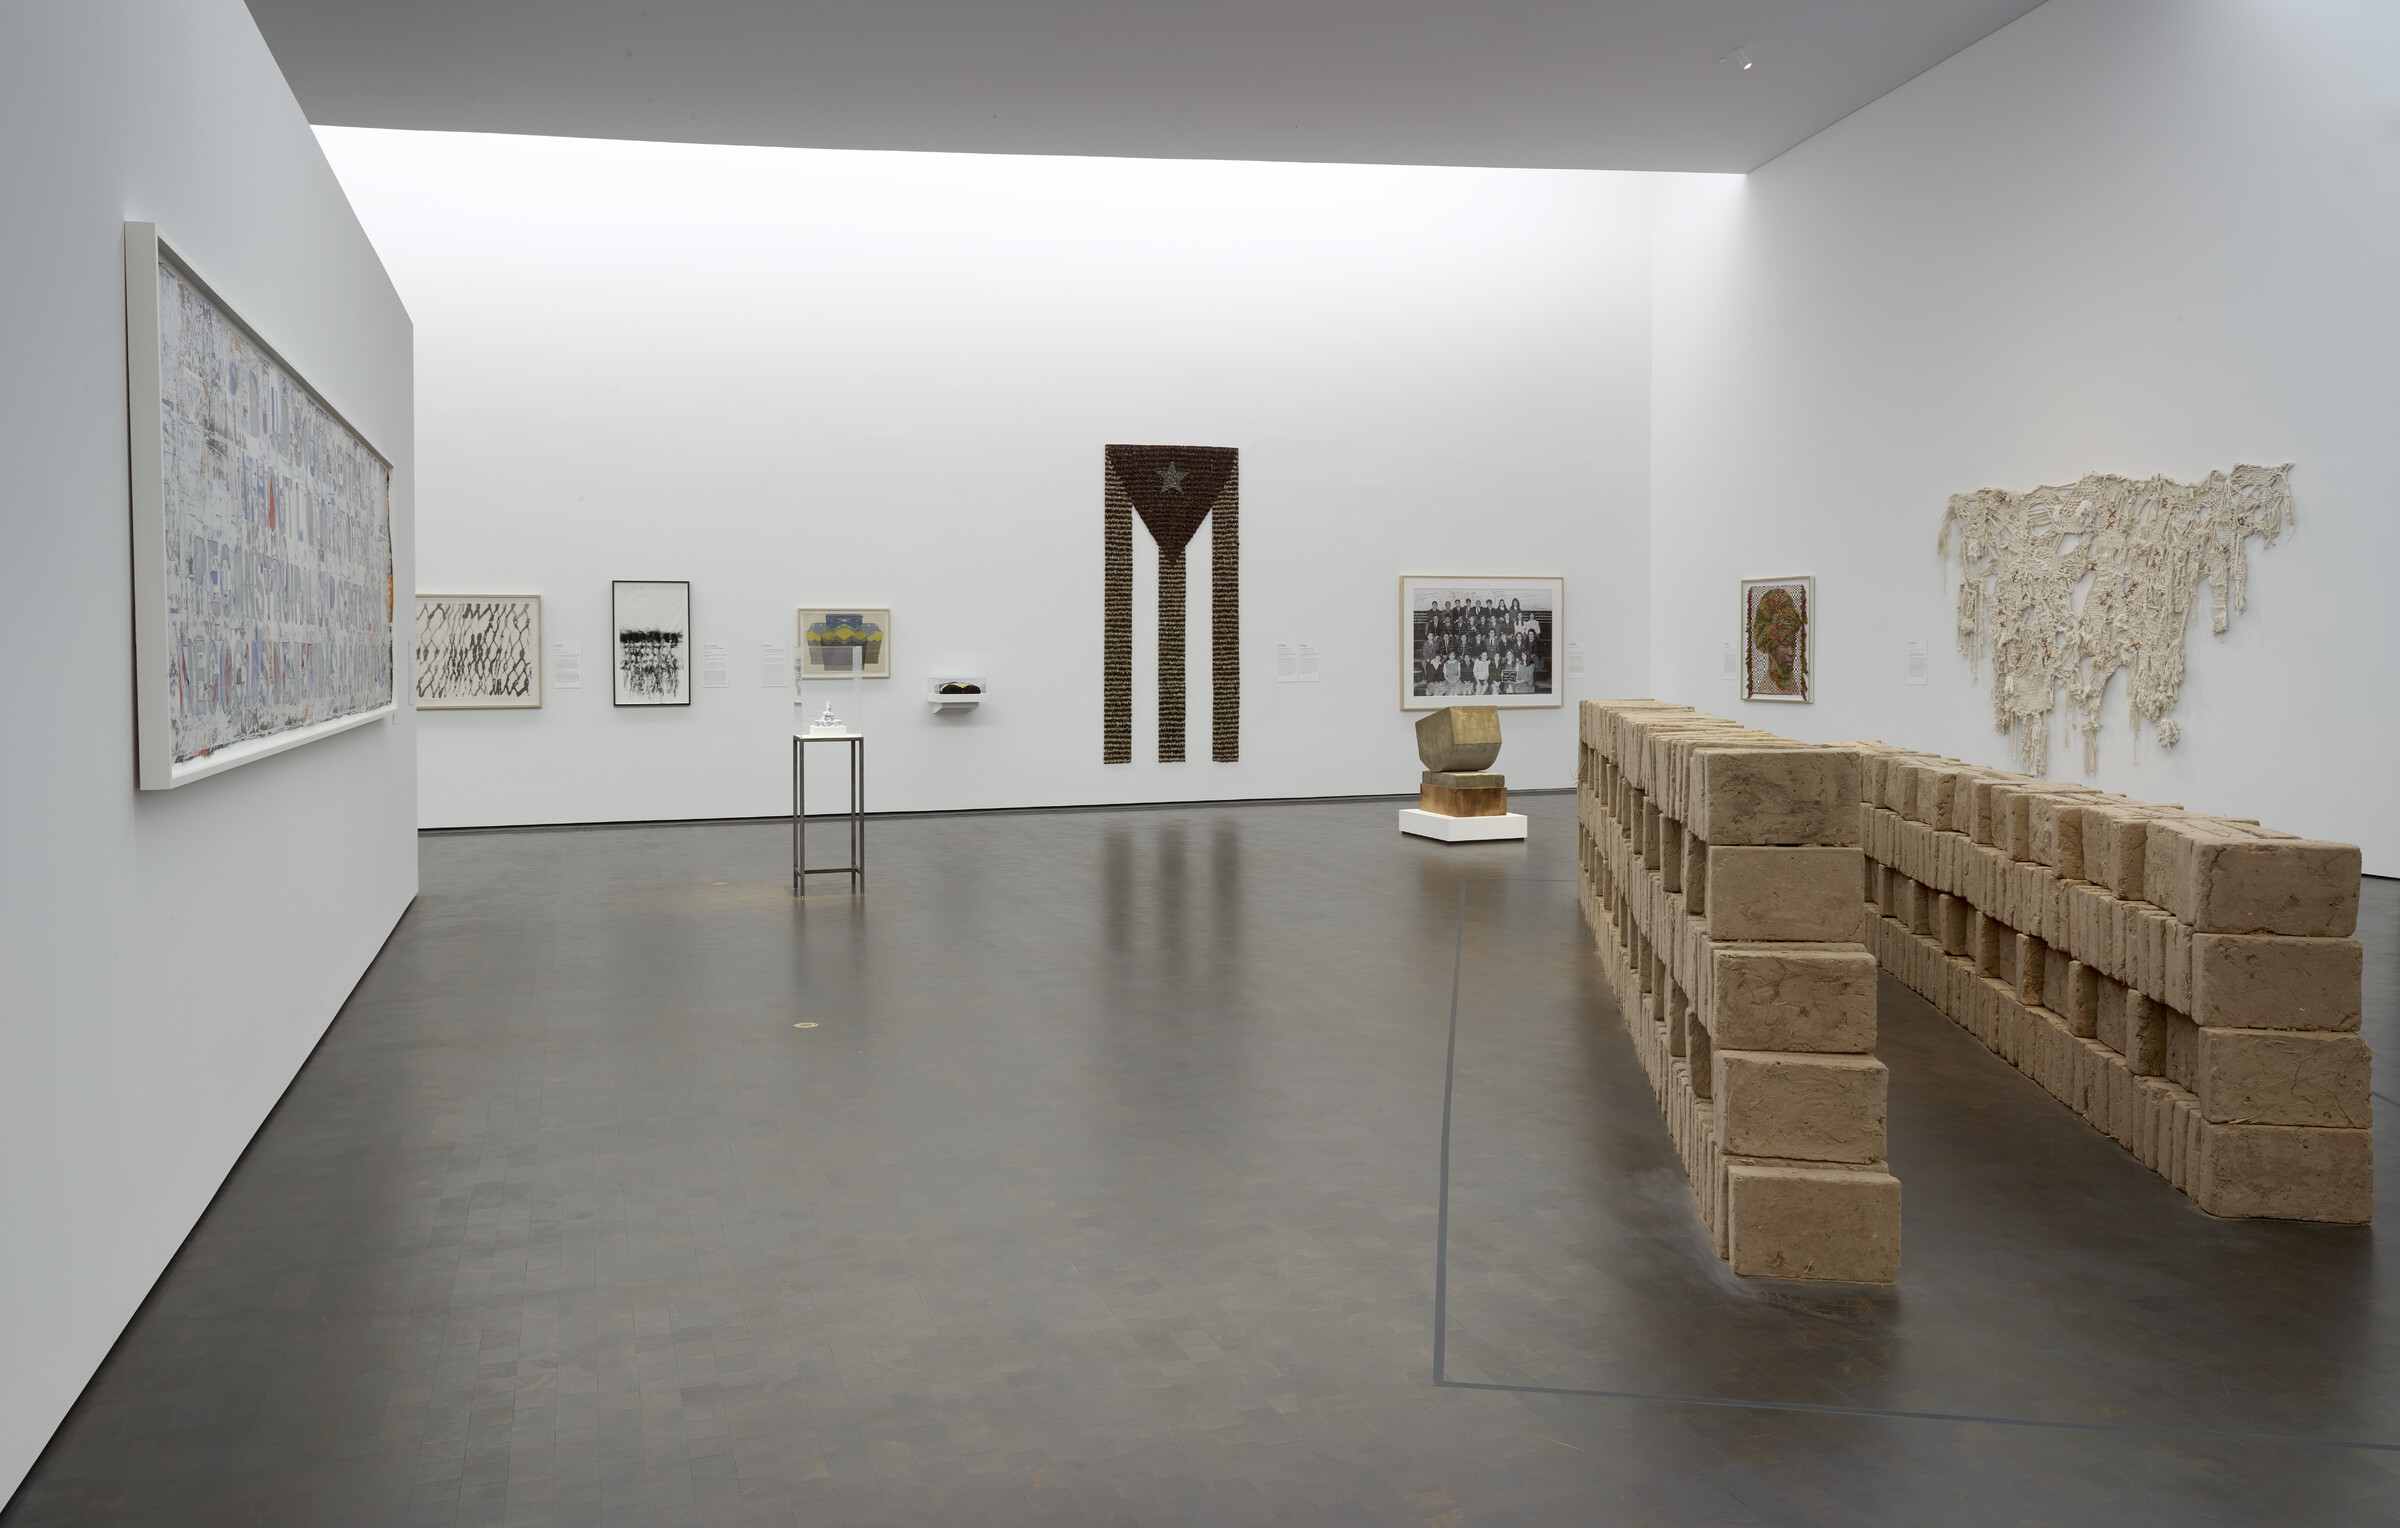 <p><i>Collectivity&nbsp;</i>in&nbsp;<i>Connecting Currents: Contemporary Art at the Museum of Fine Arts, Houston</i><br />
The Nancy and Rich Kinder Building<br />
November 21, 2020 through Summer 2022</p>
